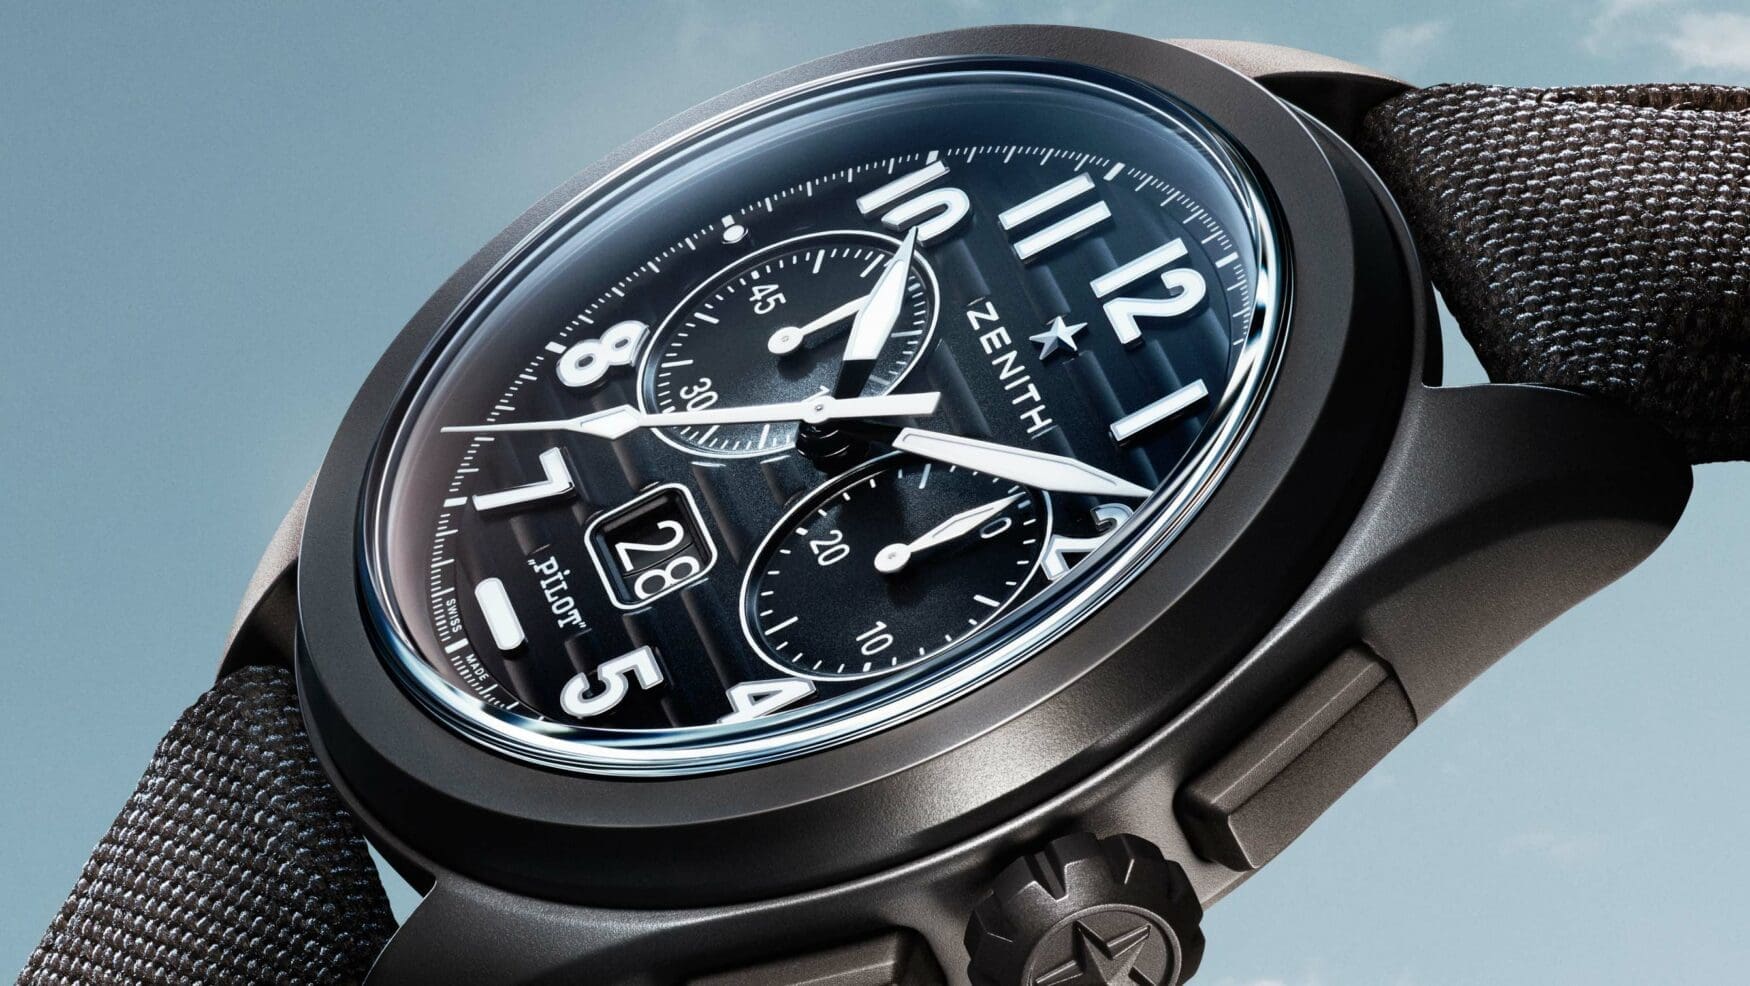 Flying high: Zenith redesigns their Pilot Automatic and Pilot Big Date Flyback